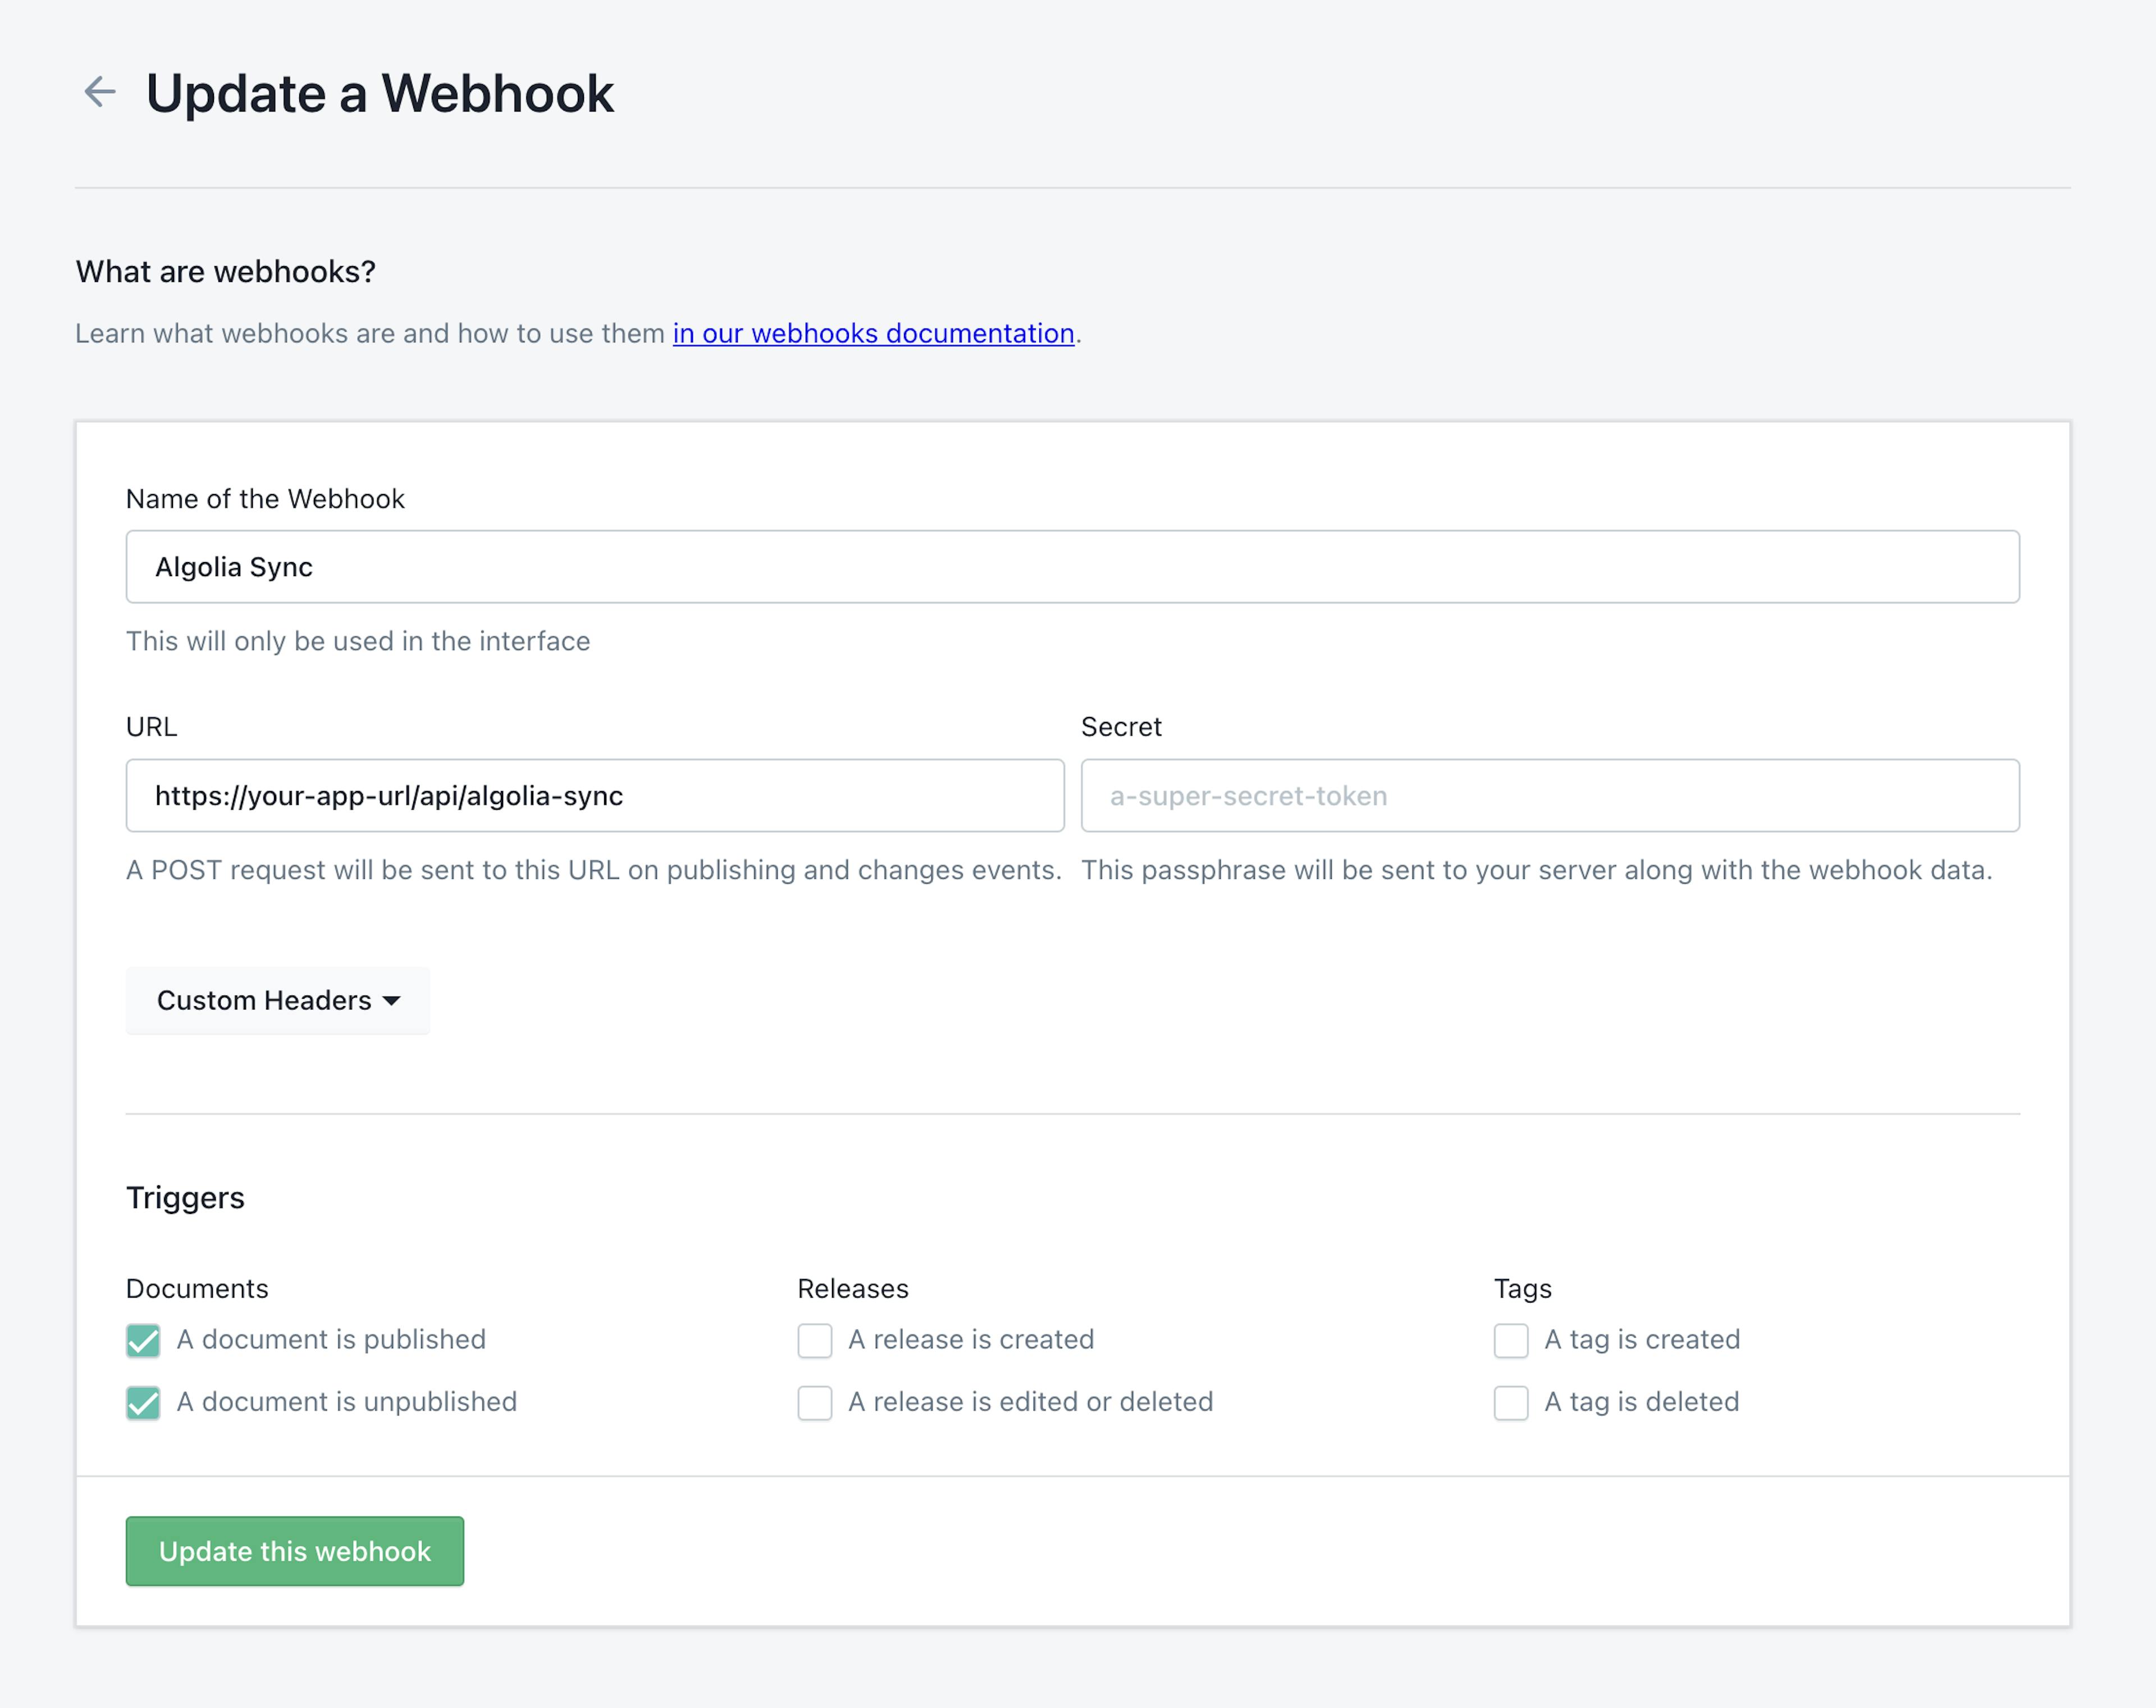 An image of the webhook dashboard in Prismic.